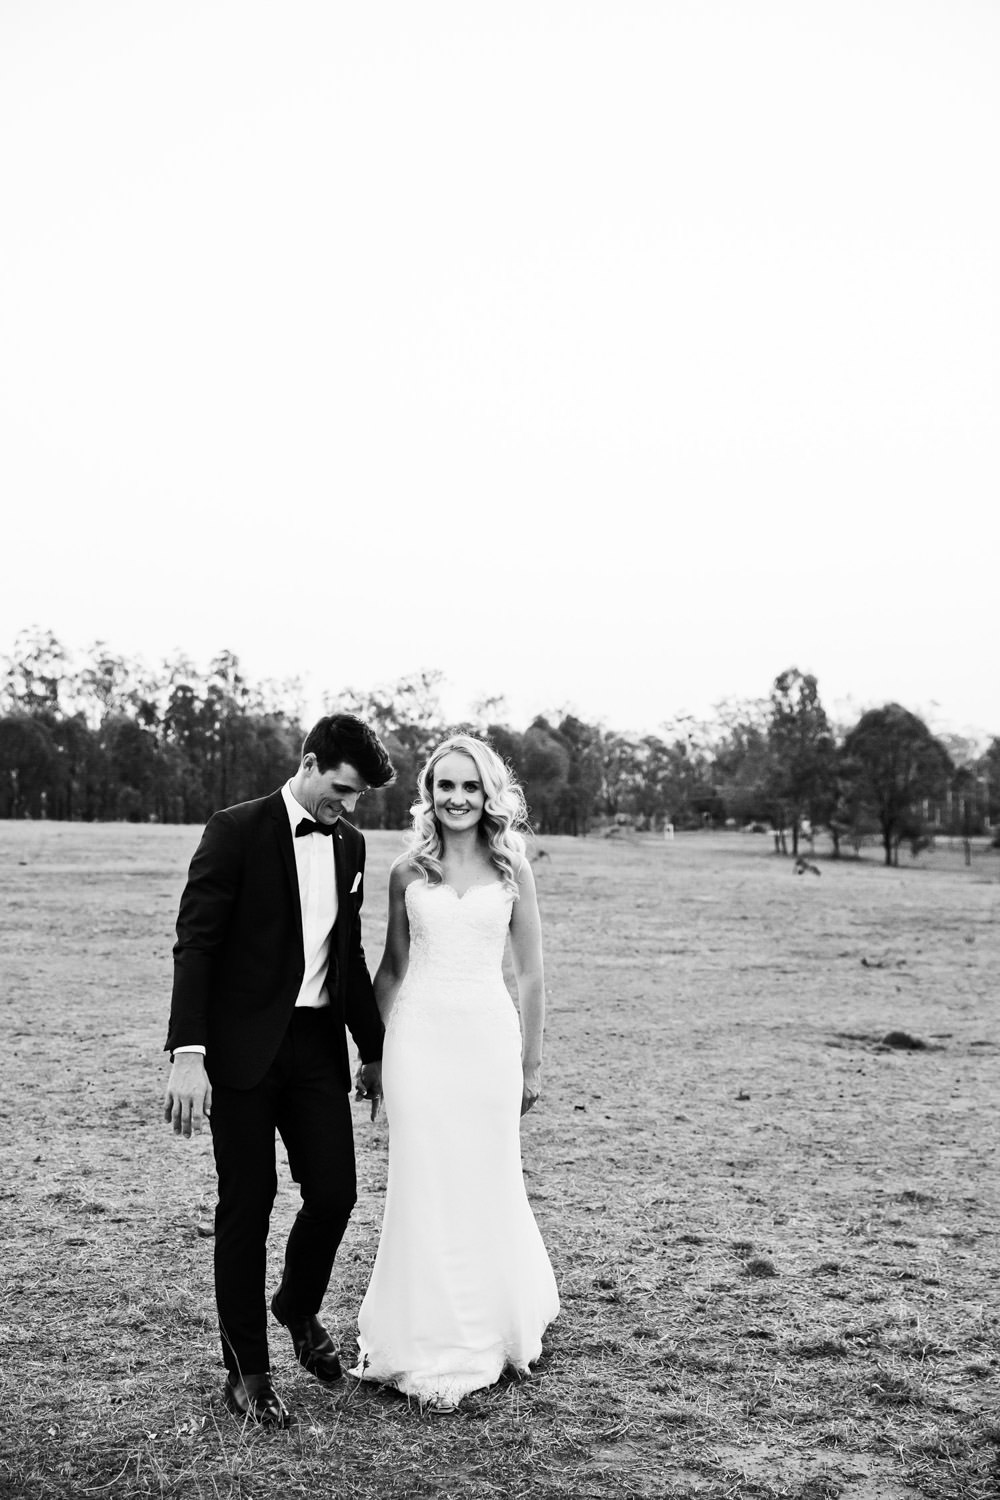 sunset-portraits-natural, fun, romantic-wedding-photography at Spicers-hiddenvale-QuinceandMulberryStudios